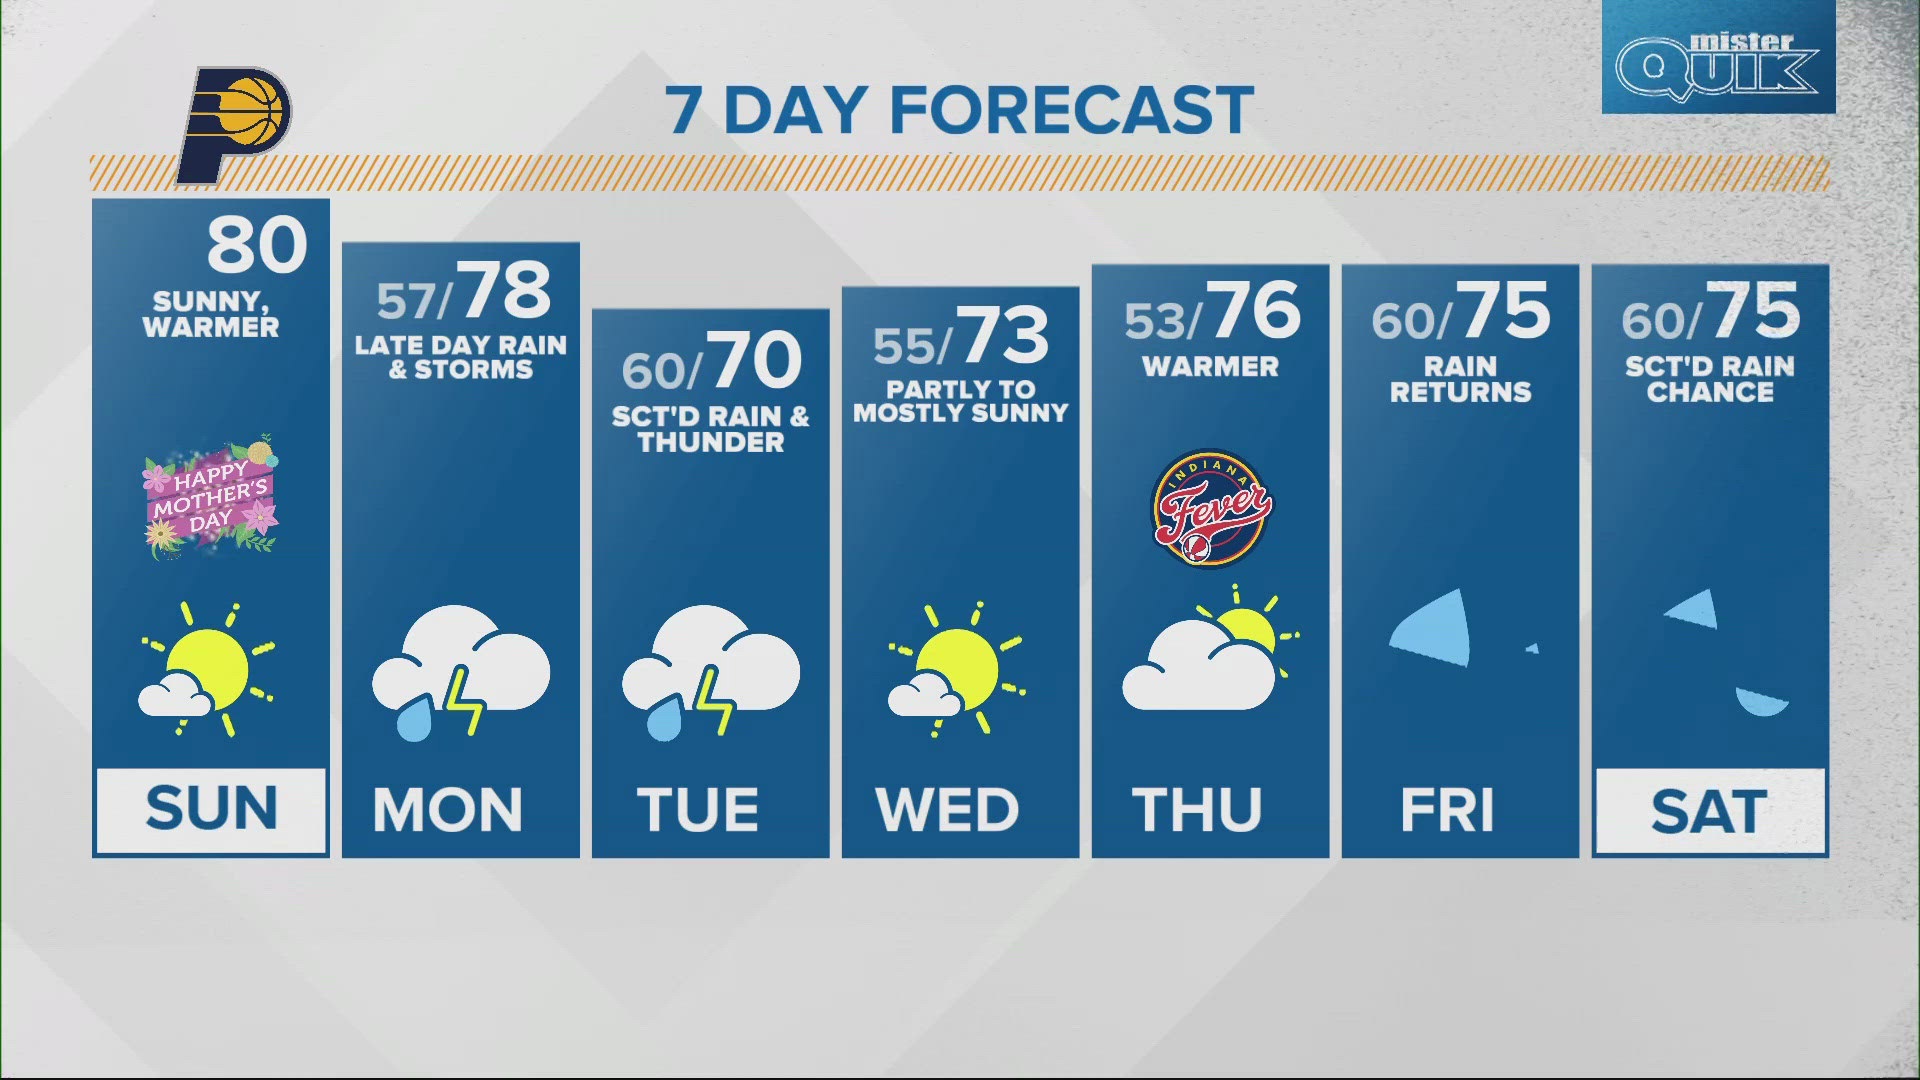 Some rain chances fill the forecast this week with highs in the 70s.